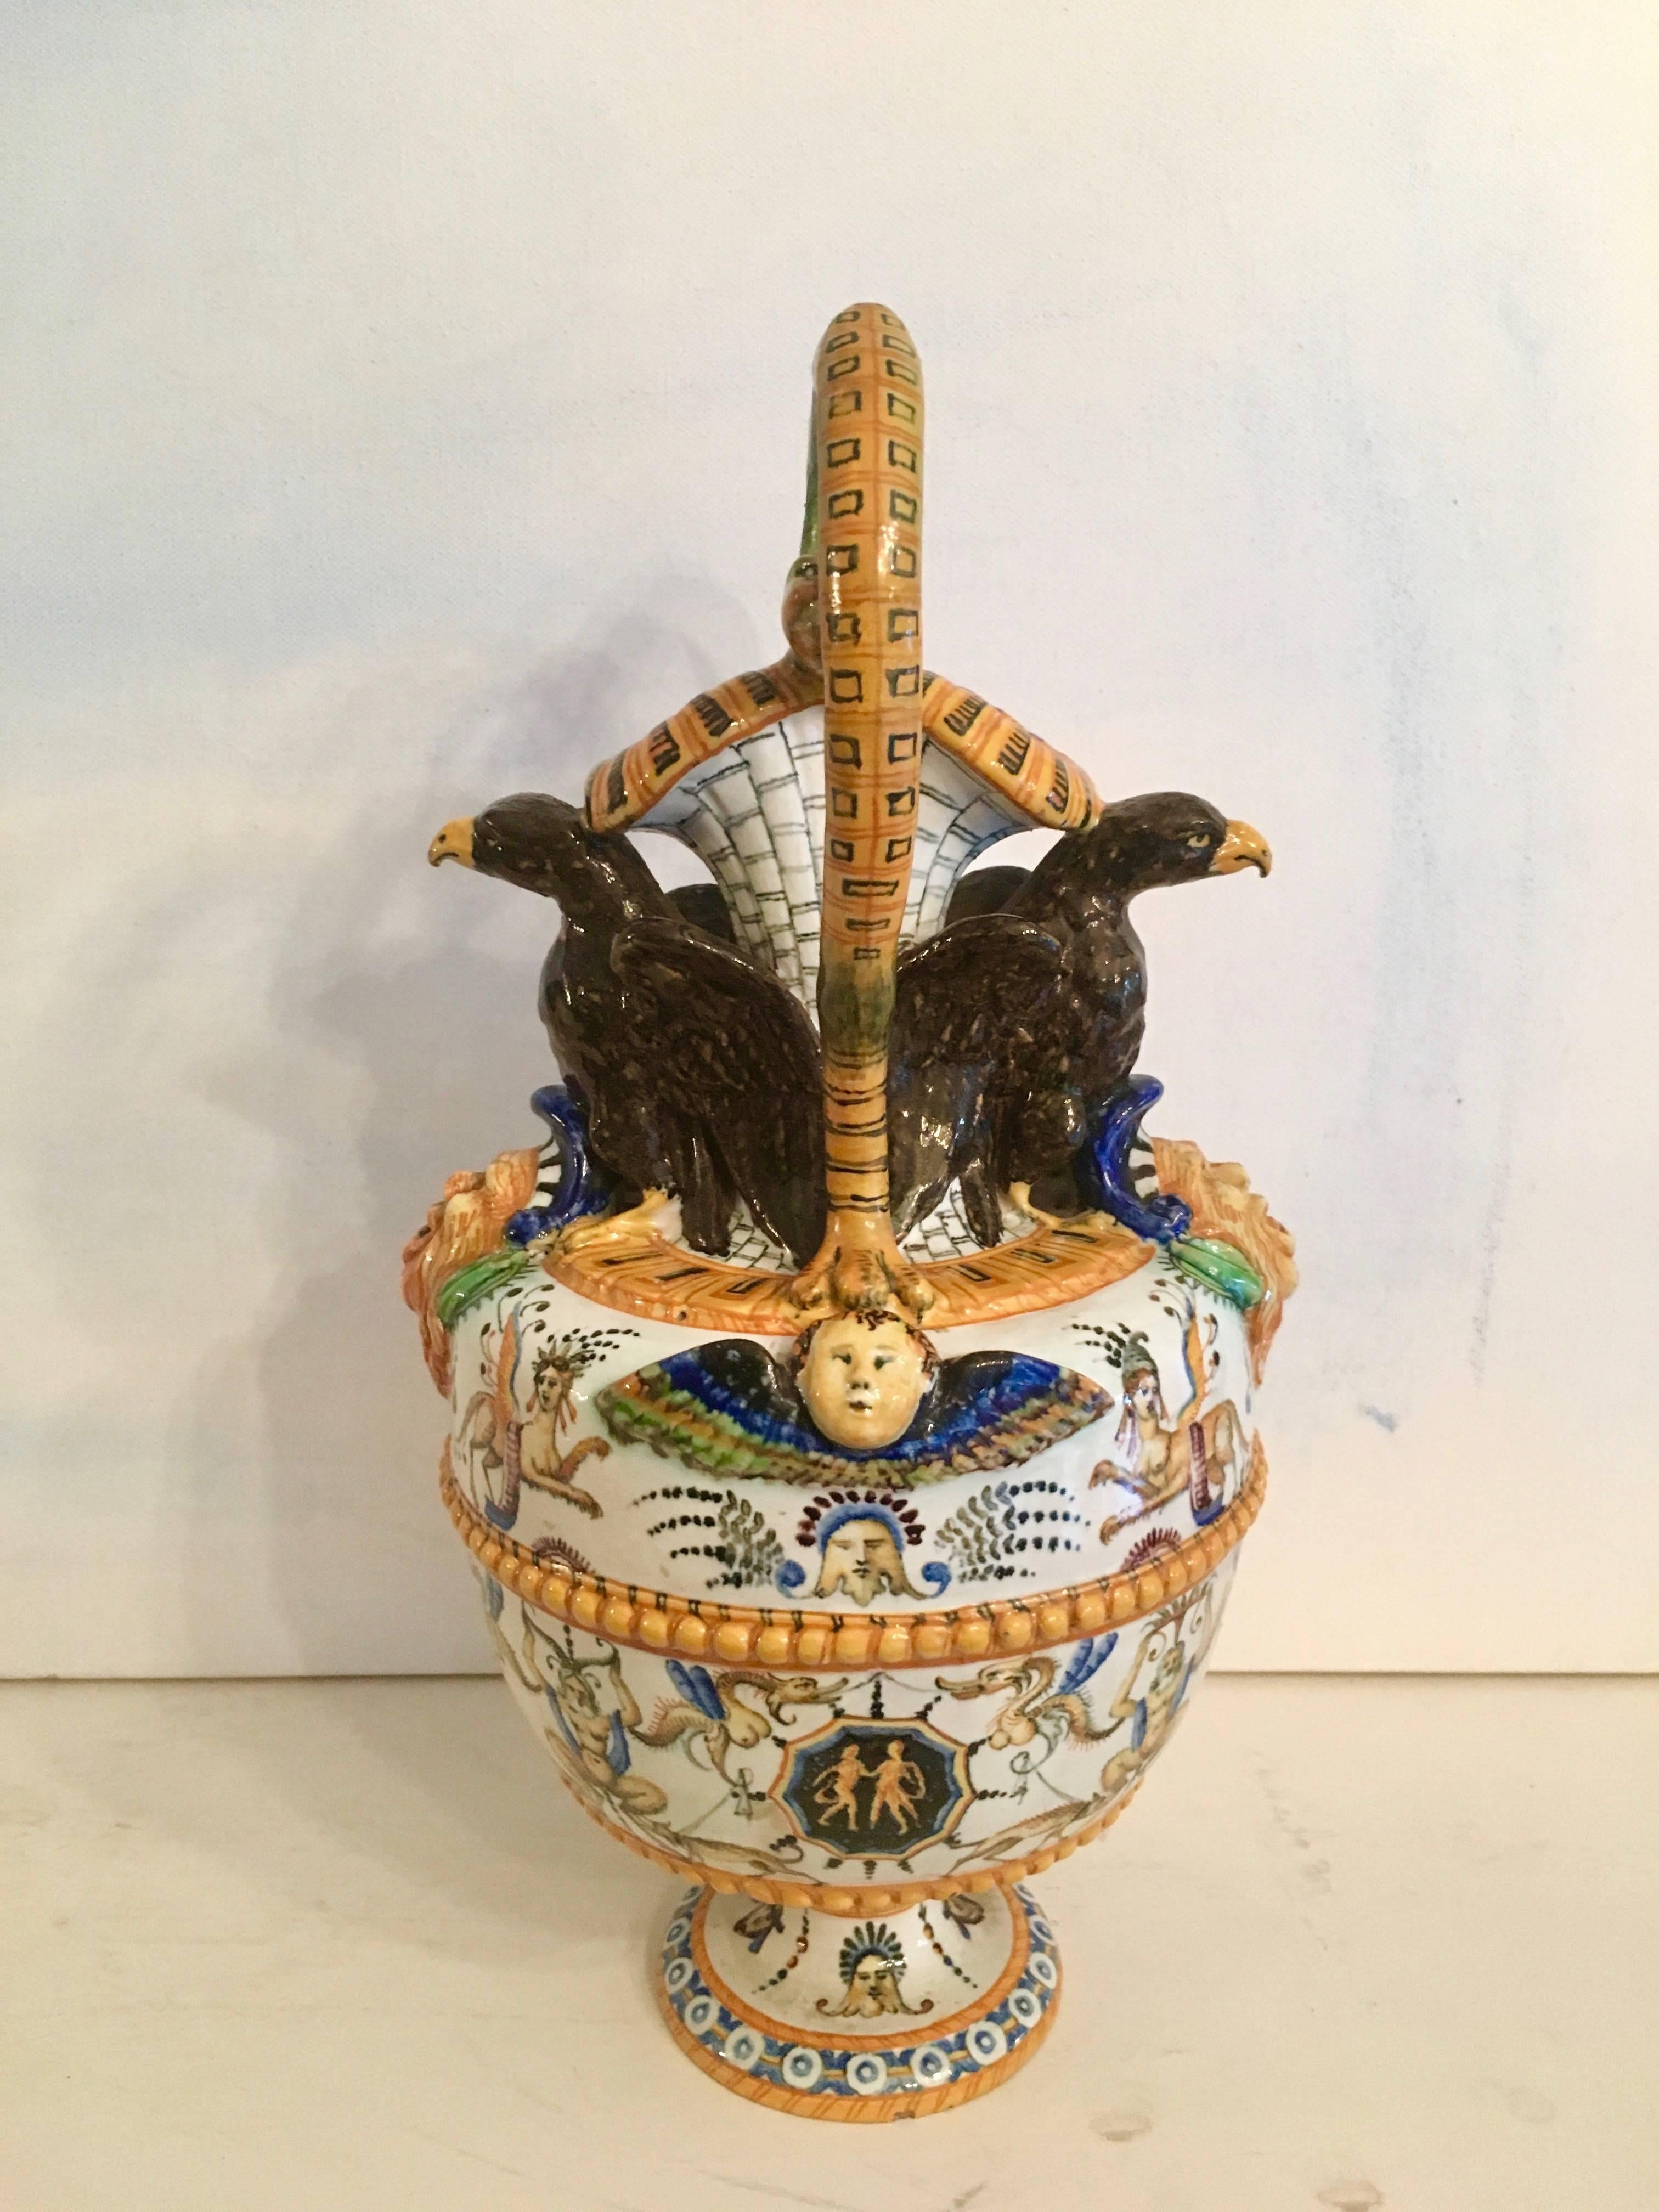 Stunning Majolica vase. Details on this piece are exceptional, from the Dual serpents forming the handle, with crows perched and beautifully carved faces set into the top, and mythological creatures of serpents, pan and phoenix to embellish.